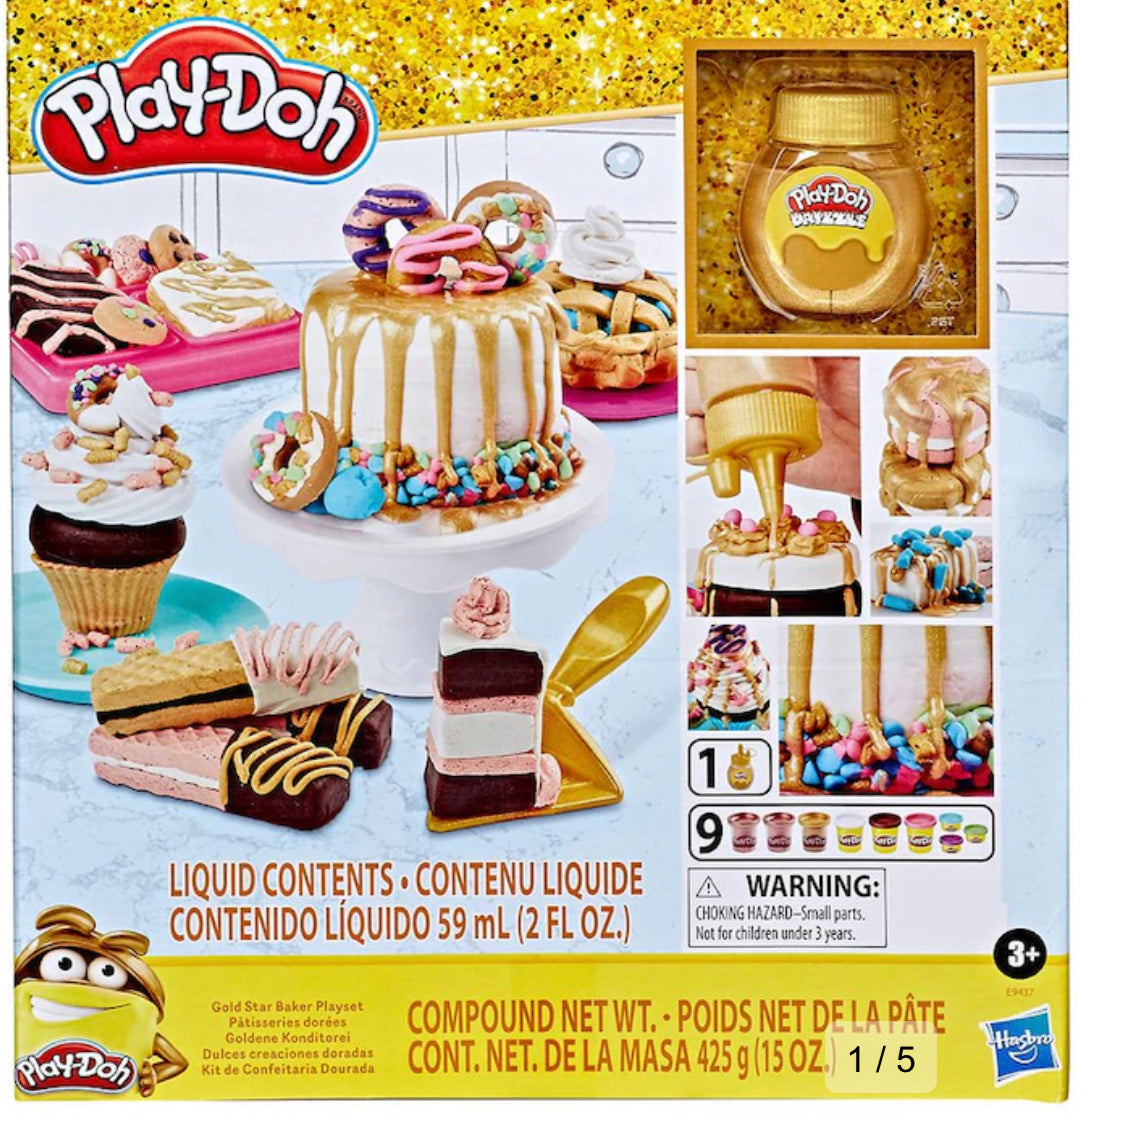 Play-Doh Gold Collection Gold Star Baker Playset